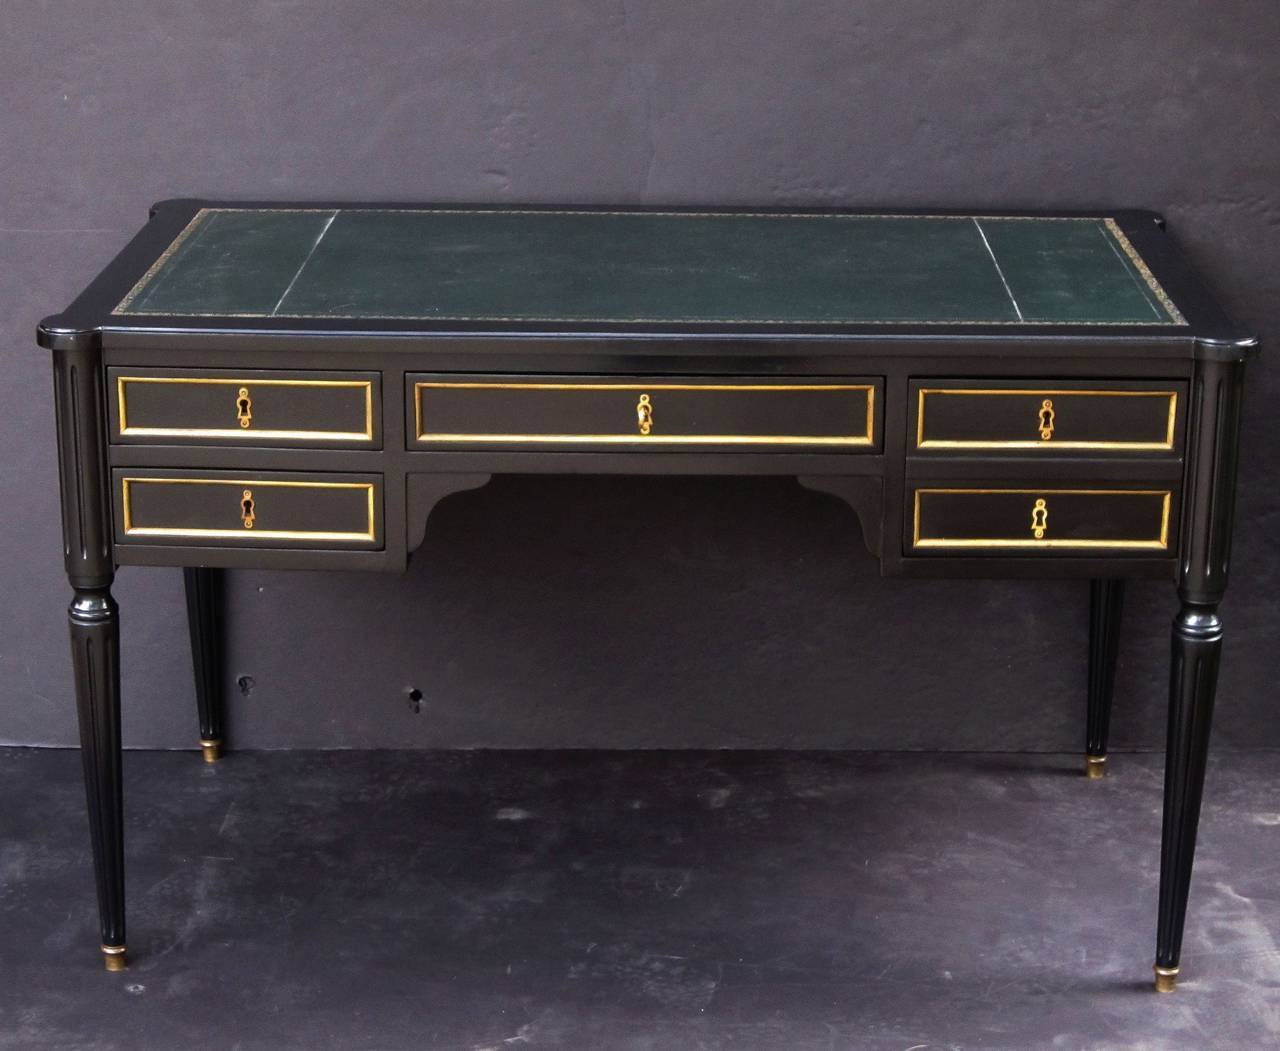 An elegant French writing desk (or table) of ebonized mahogany, featuring an embossed leather top with gilt bronze accents over a frieze with recessed drawers and opposing faux drawers, with two 14